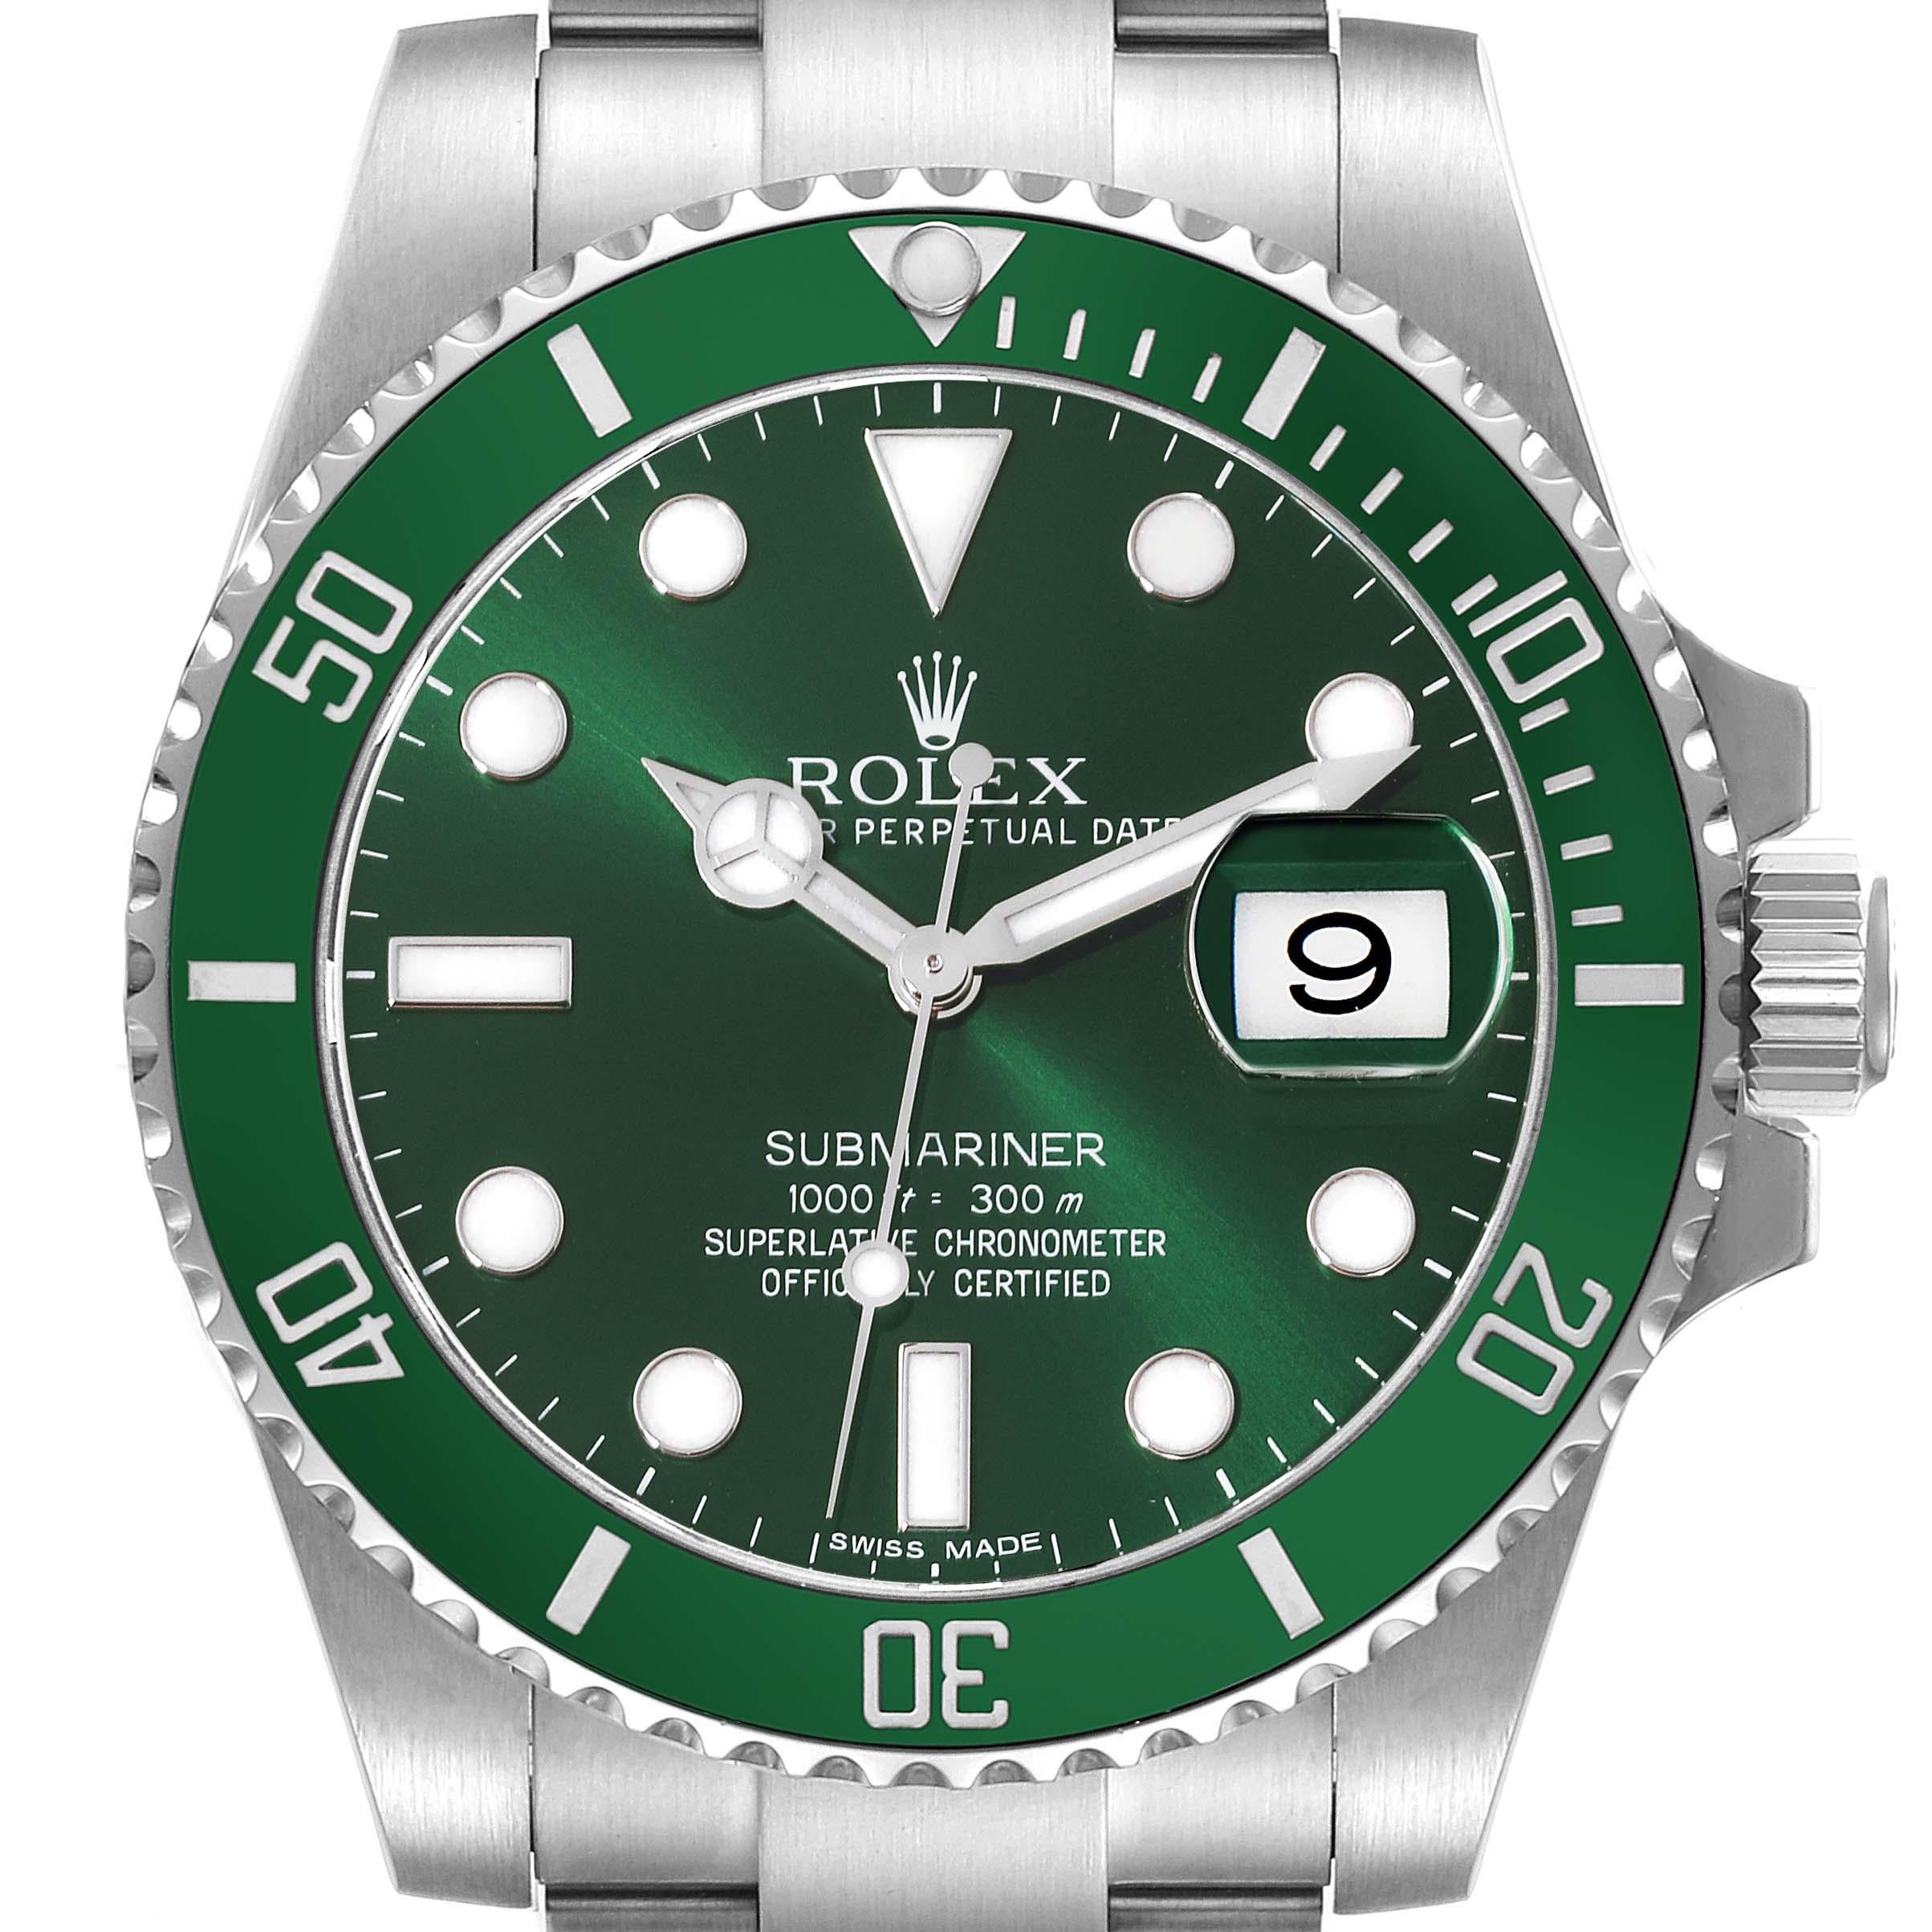 Rolex Submariner Hulk Green Dial Steel Mens Watch 116610V Box Card. Officially certified chronometer automatic self-winding movement. Oyster case 40 mm in diameter. Rolex logo on the crown. Special time-lapse unidirectional rotating green ceramic